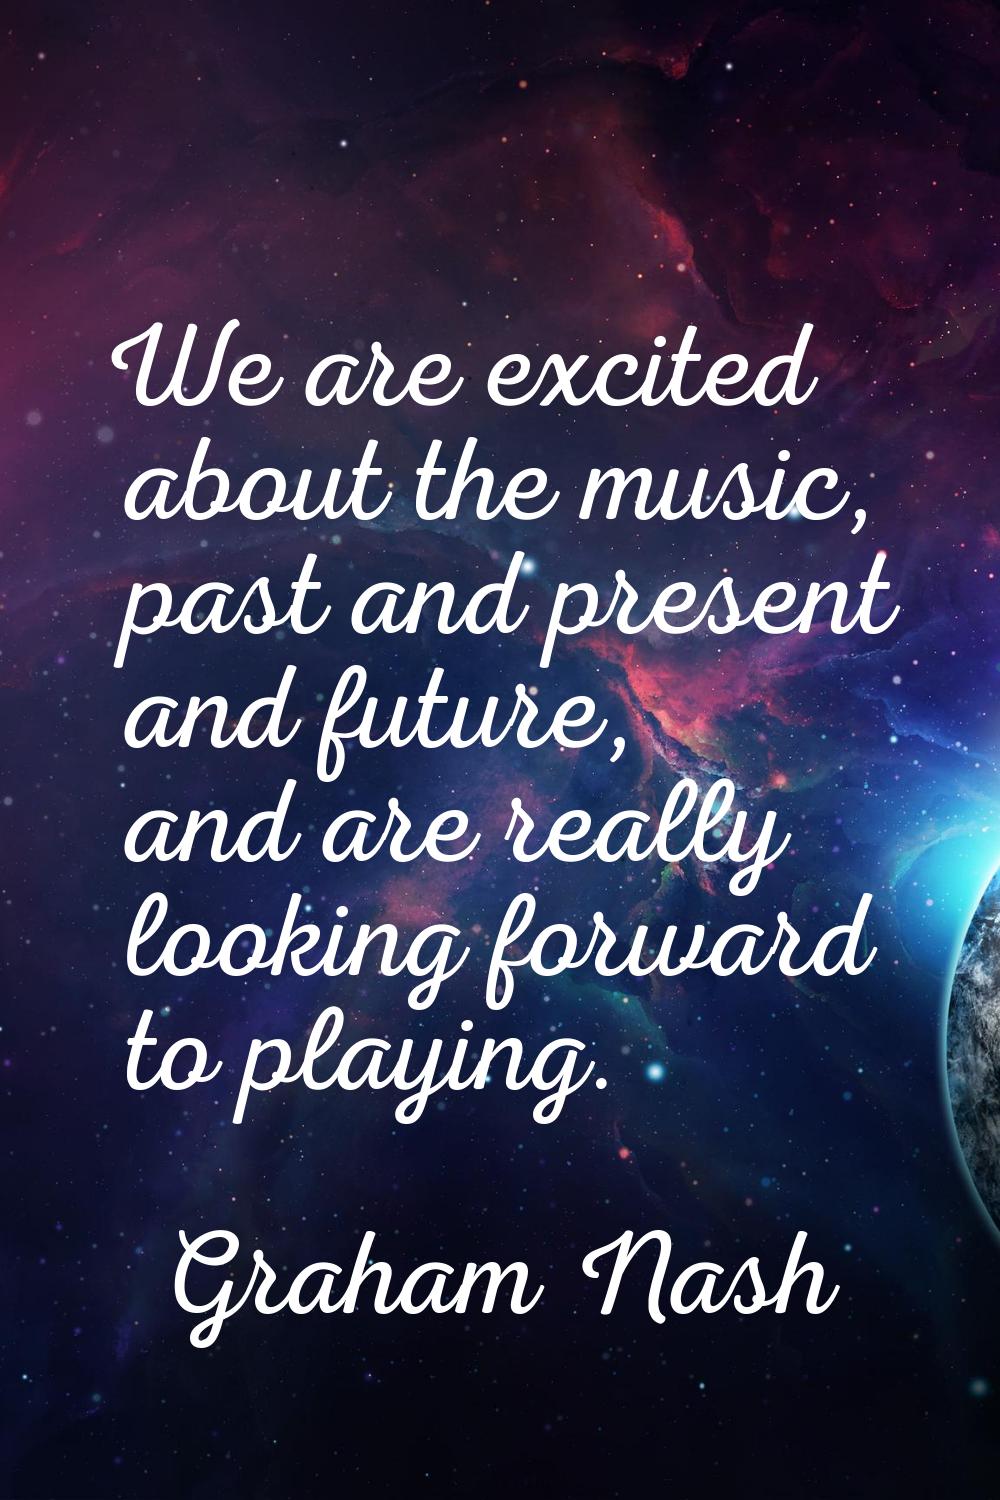 We are excited about the music, past and present and future, and are really looking forward to play